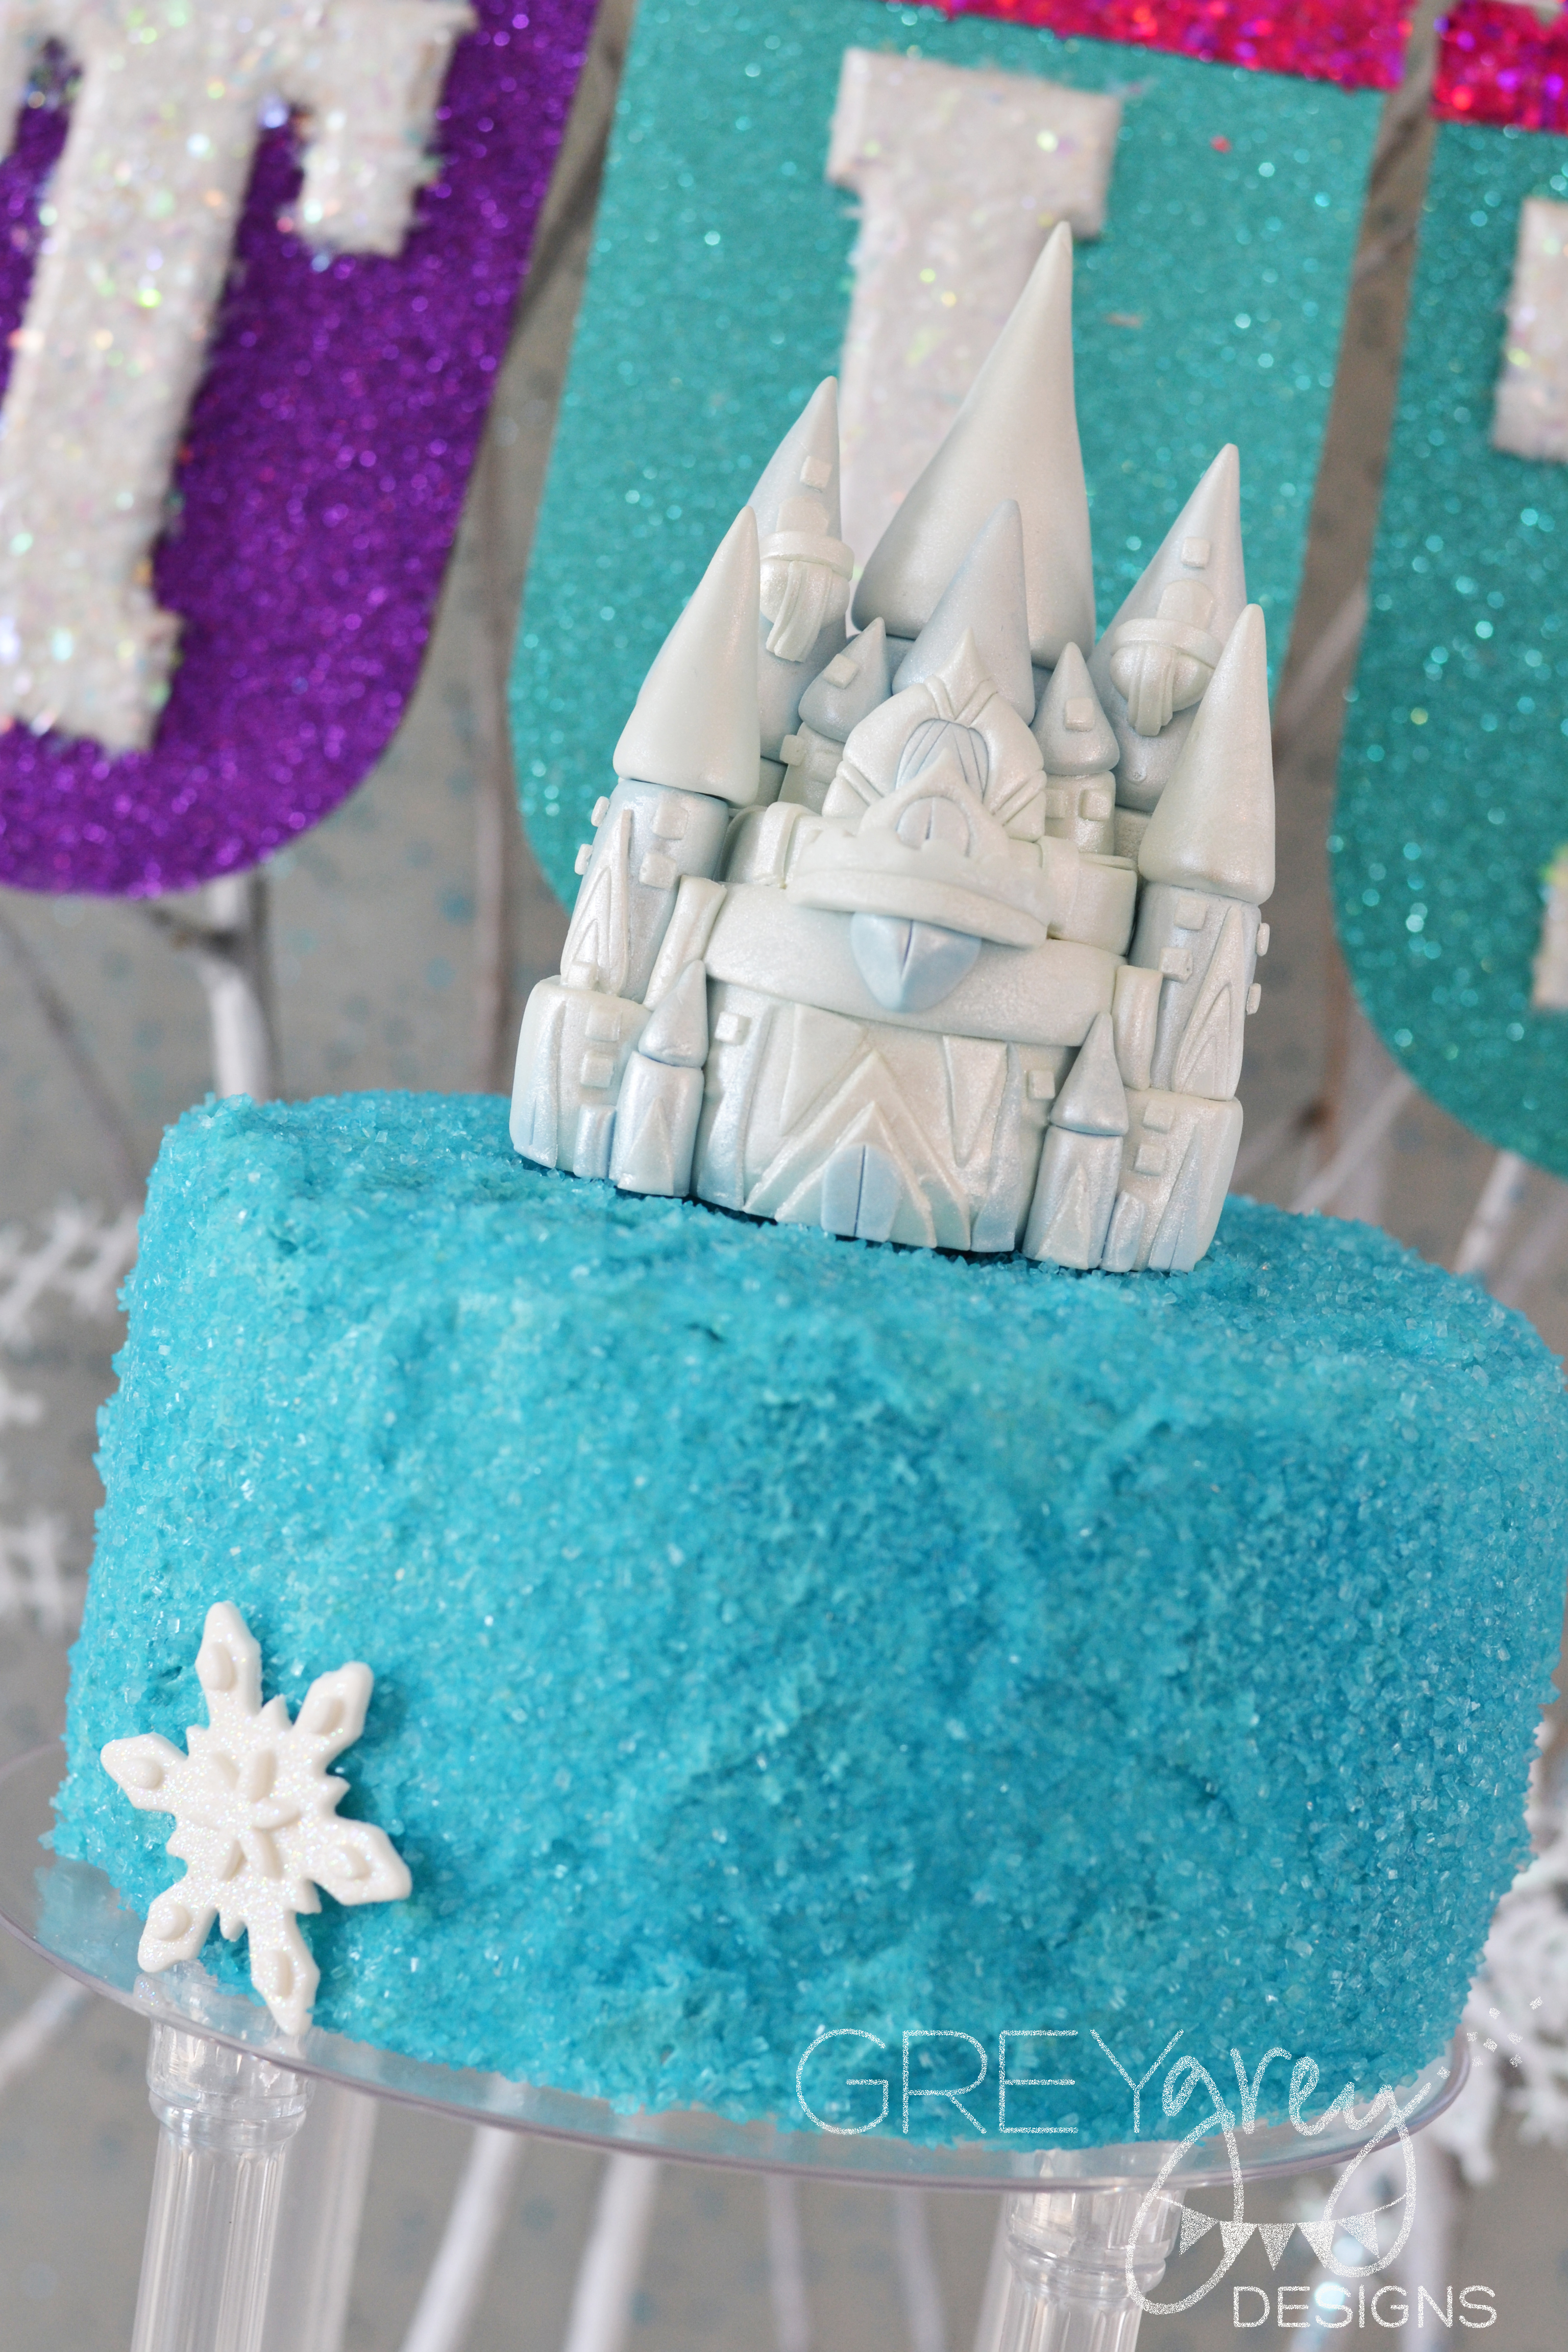 Disney Frozen Cake with Turquoise Frosting and Blue Sparkly Sugar